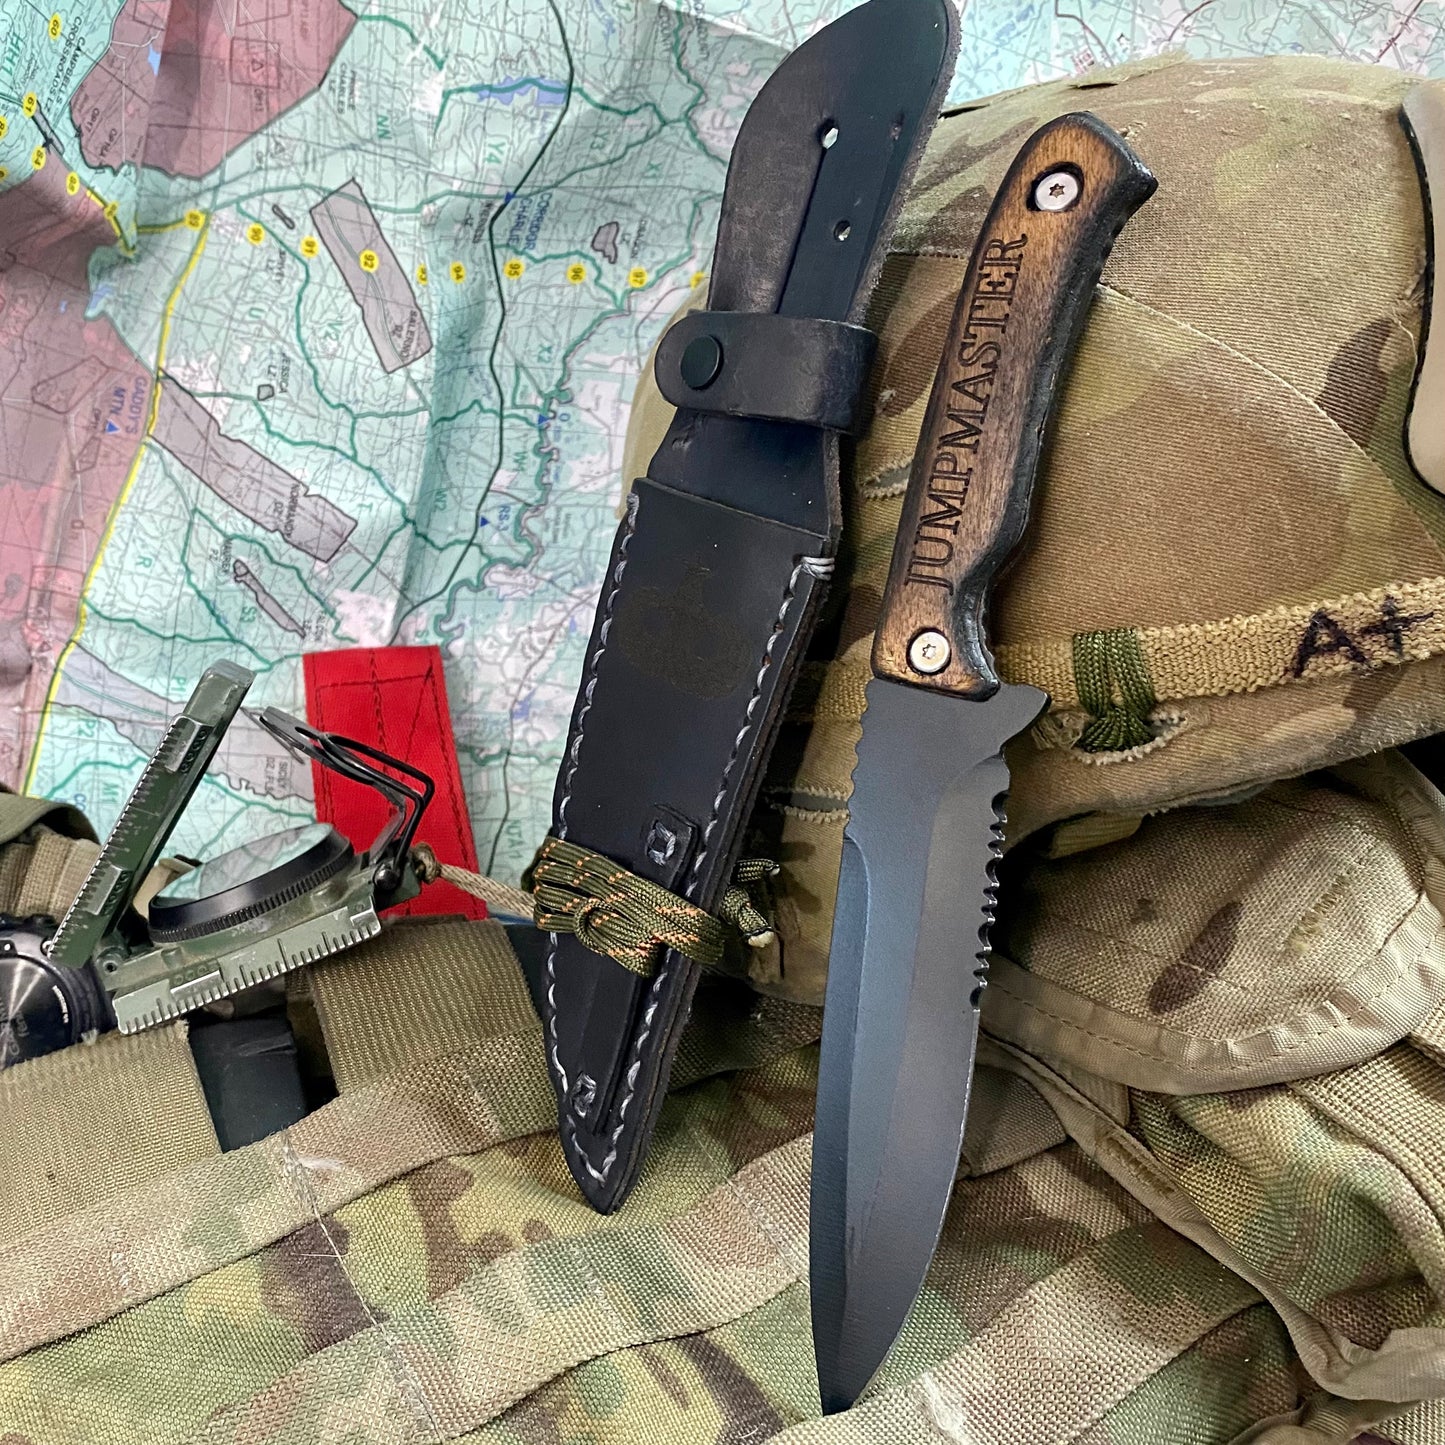 The Jumpmaster knife was developed for use by military jumpmaster personnel as an emergency cutting tool. This knife is custom made; you won't find any other knife like it. It measures in at 10 inches total length with a 6-inch blade. Designed to be lightweight, stylish and effective. Each knife is custom made